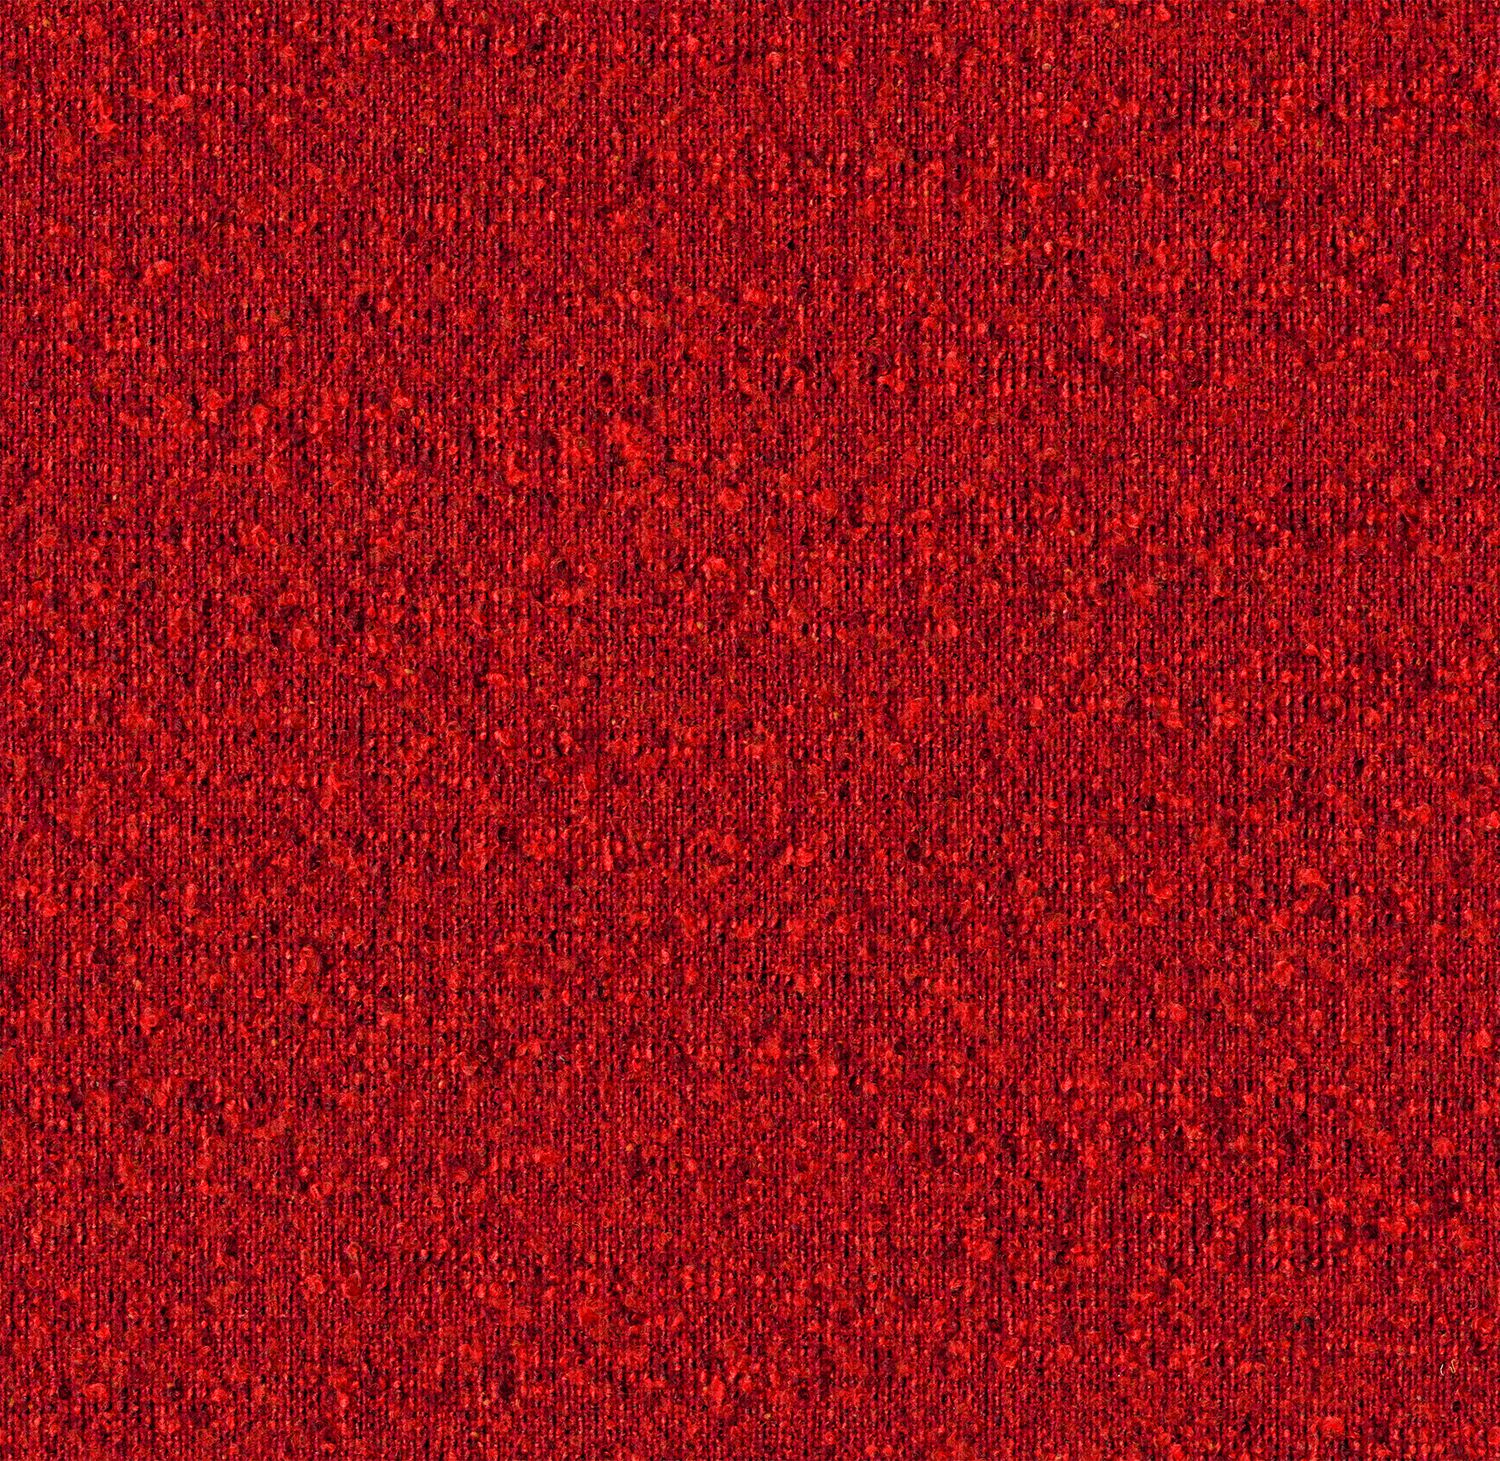 Everyday Boucle - Firethorn - 4111 - 21 - Half Yard Tileable Swatches